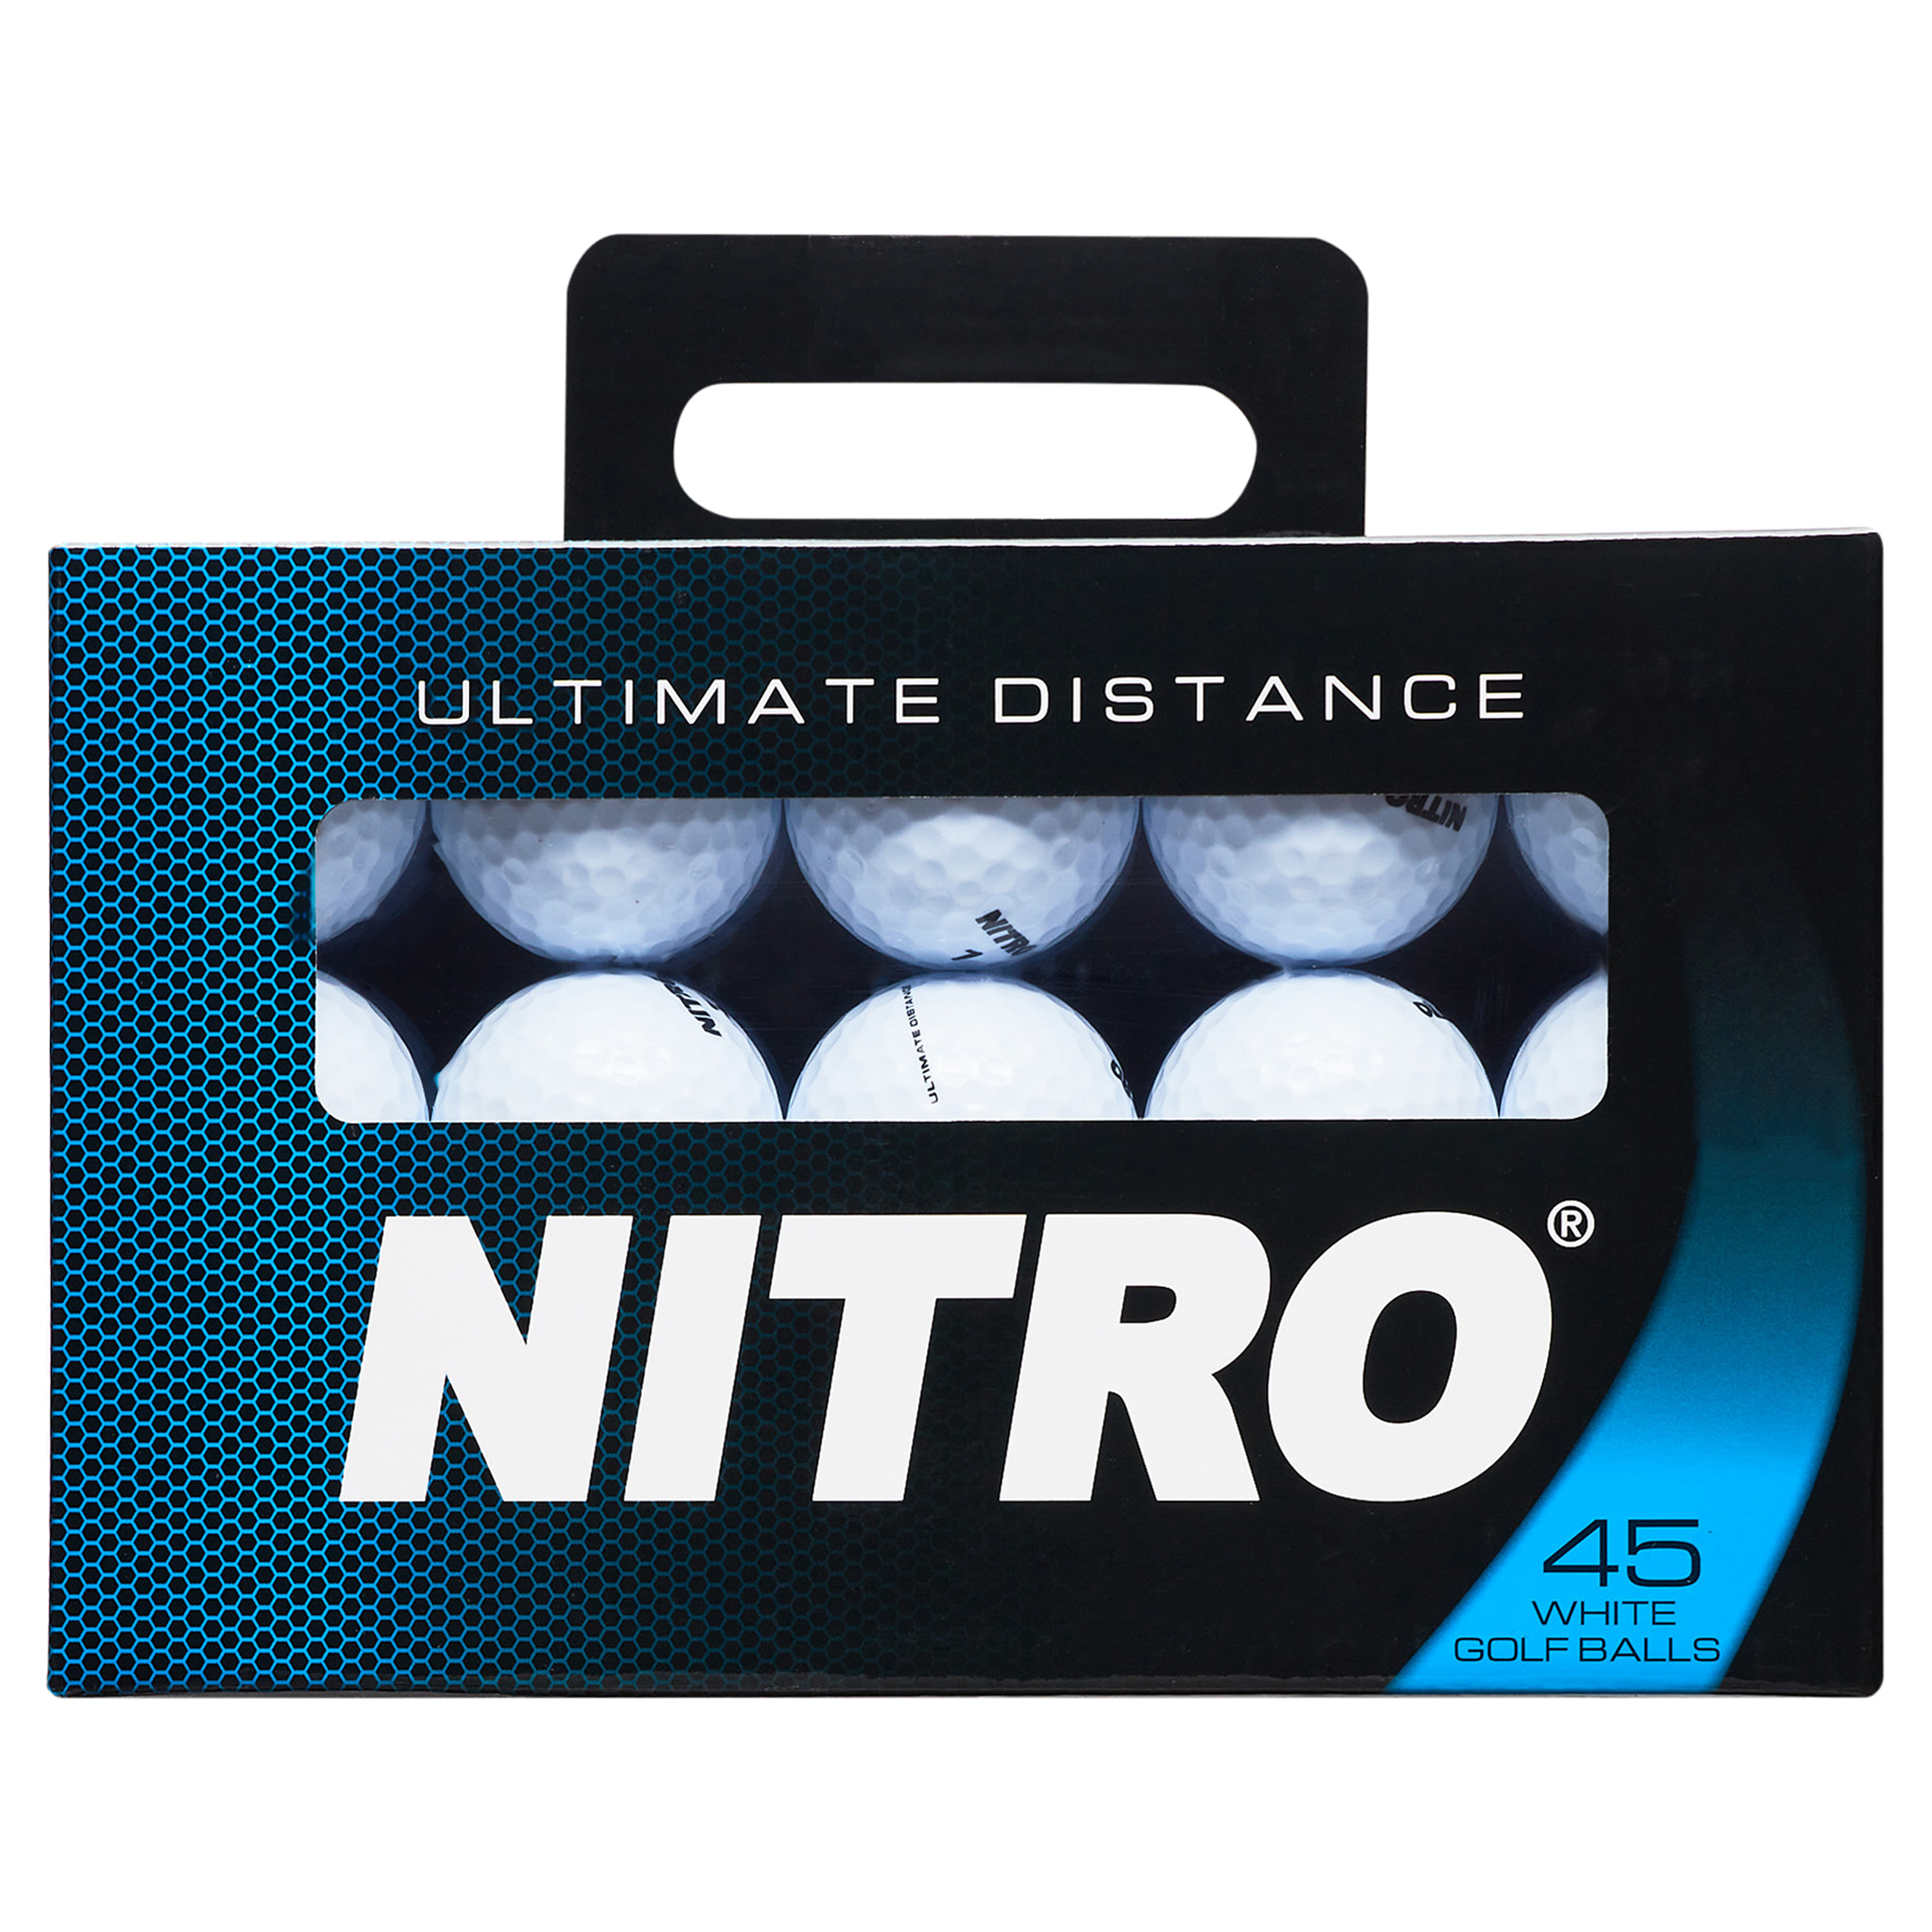 Nitro Golf Ultimate Distance Golf Balls, White, 45 Pack - image 1 of 4